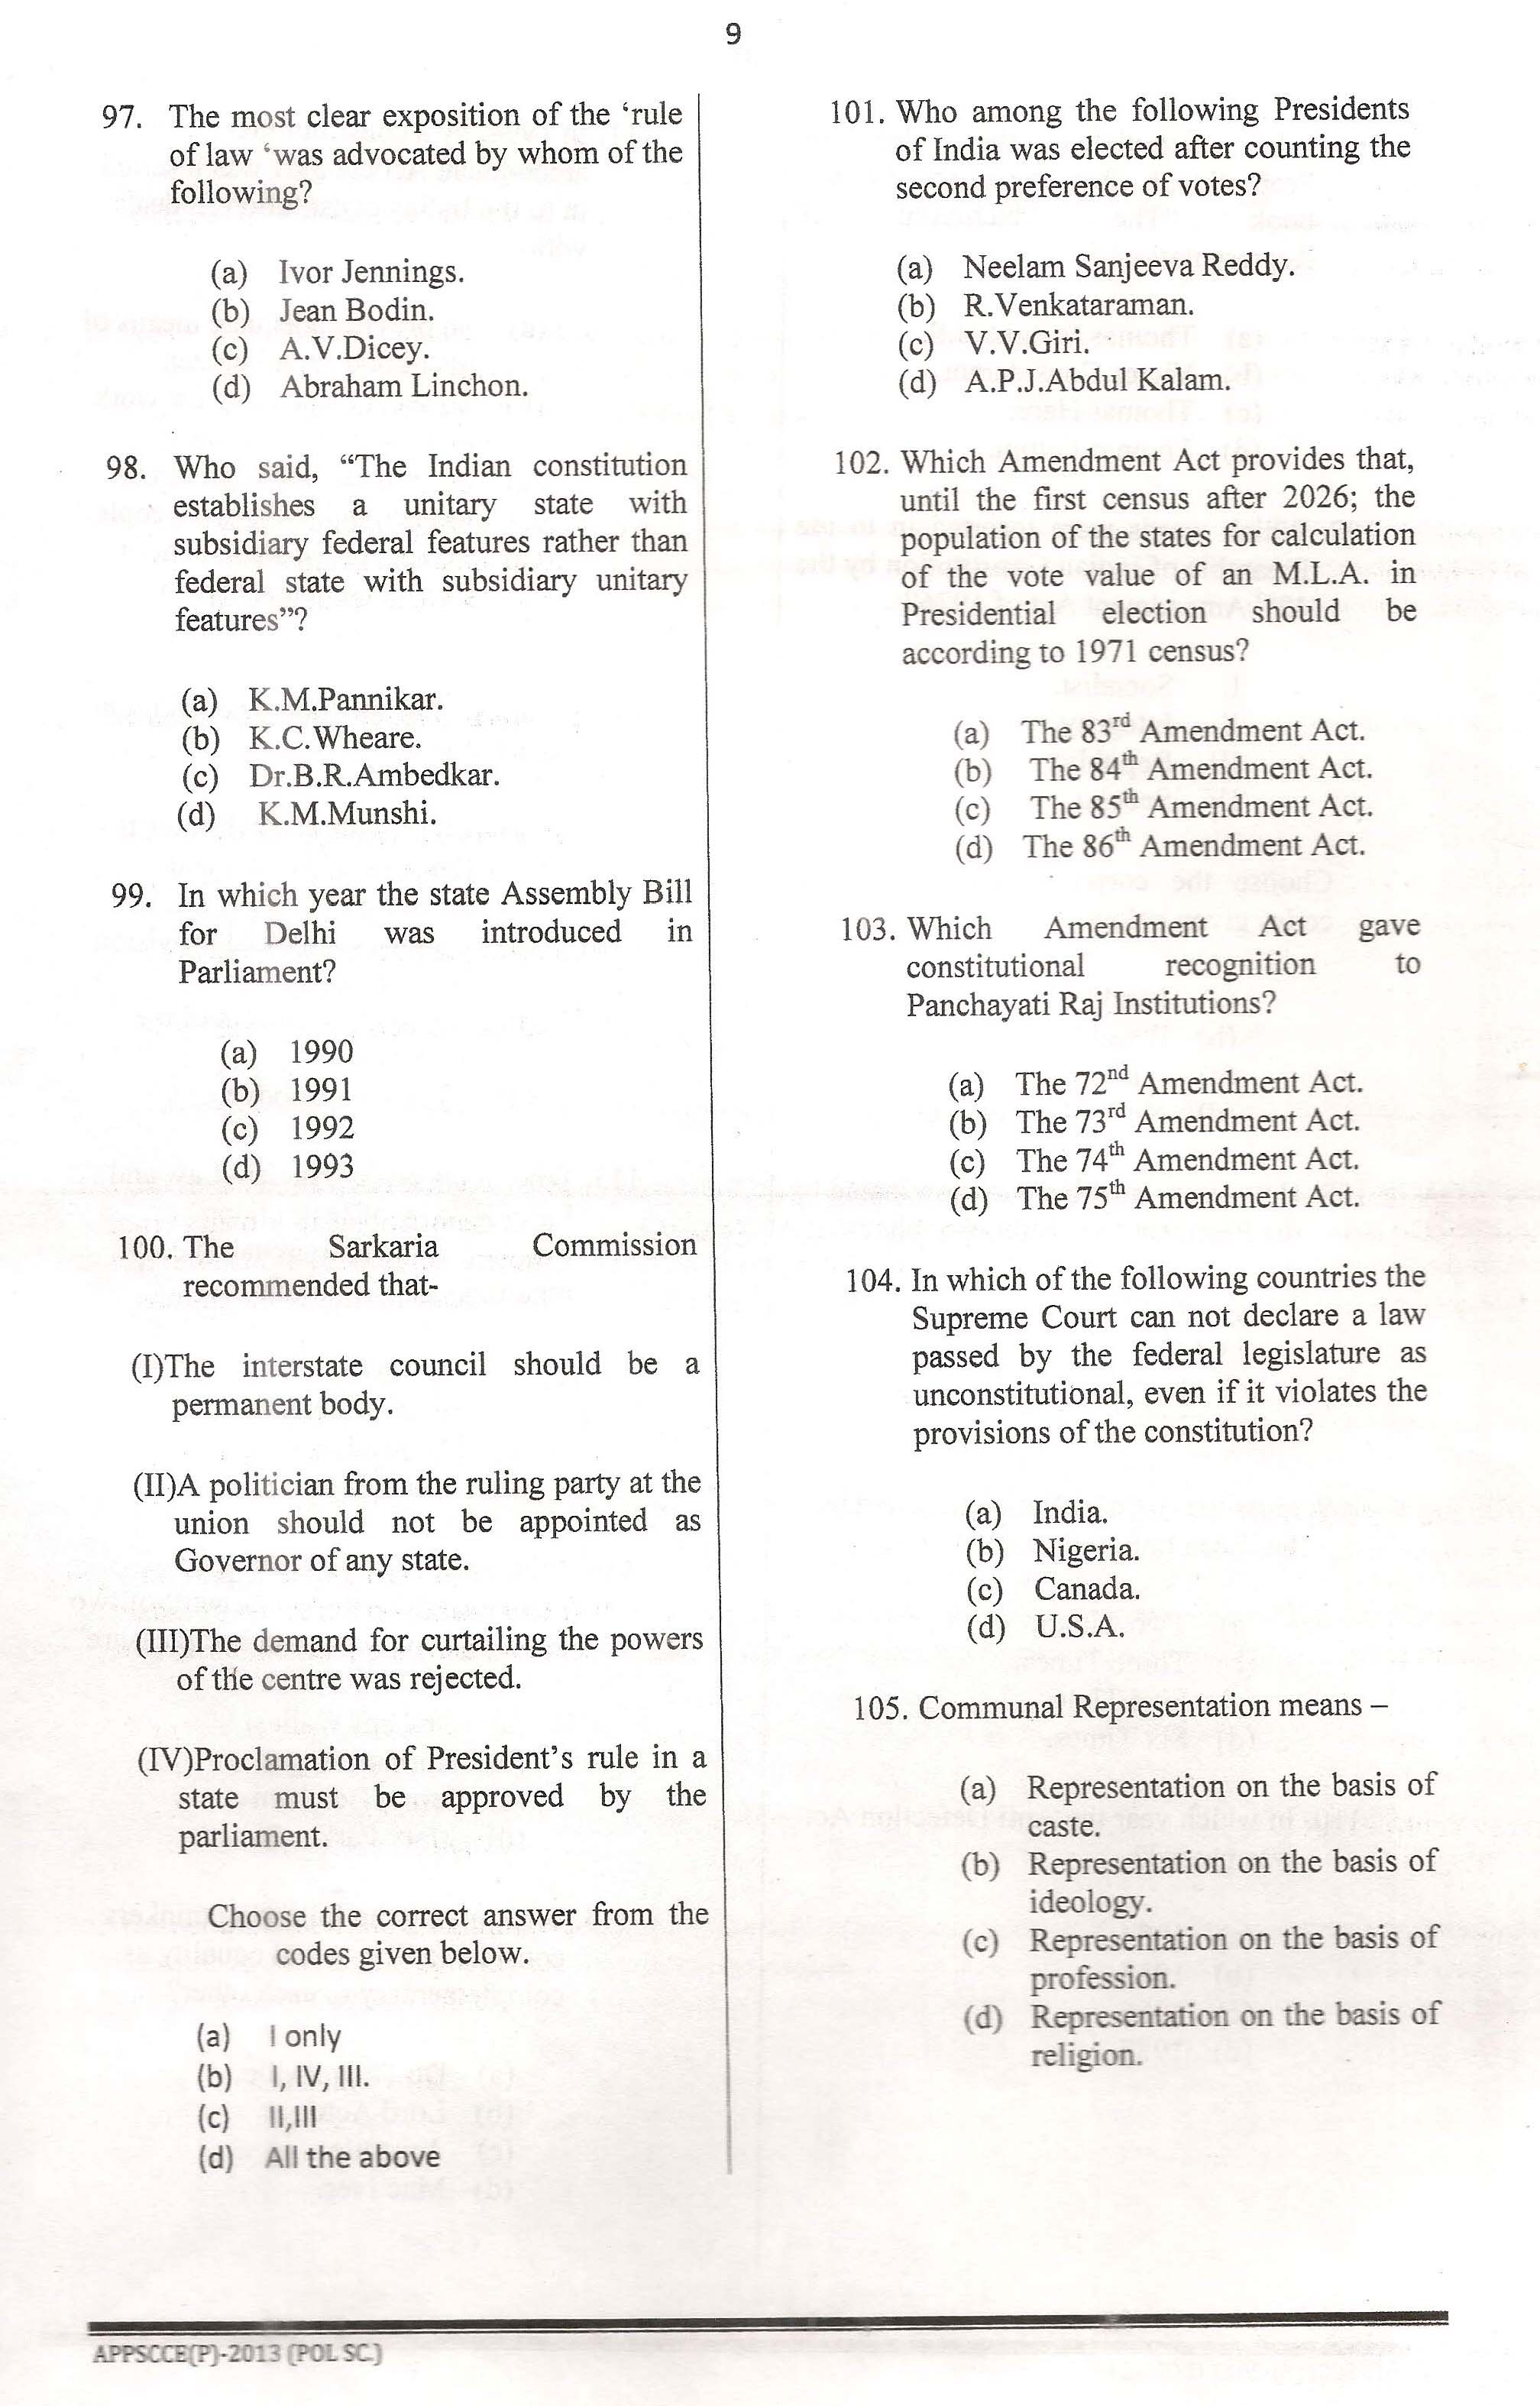 APPSC Combined Competitive Prelims Exam 2013 Political Science 10